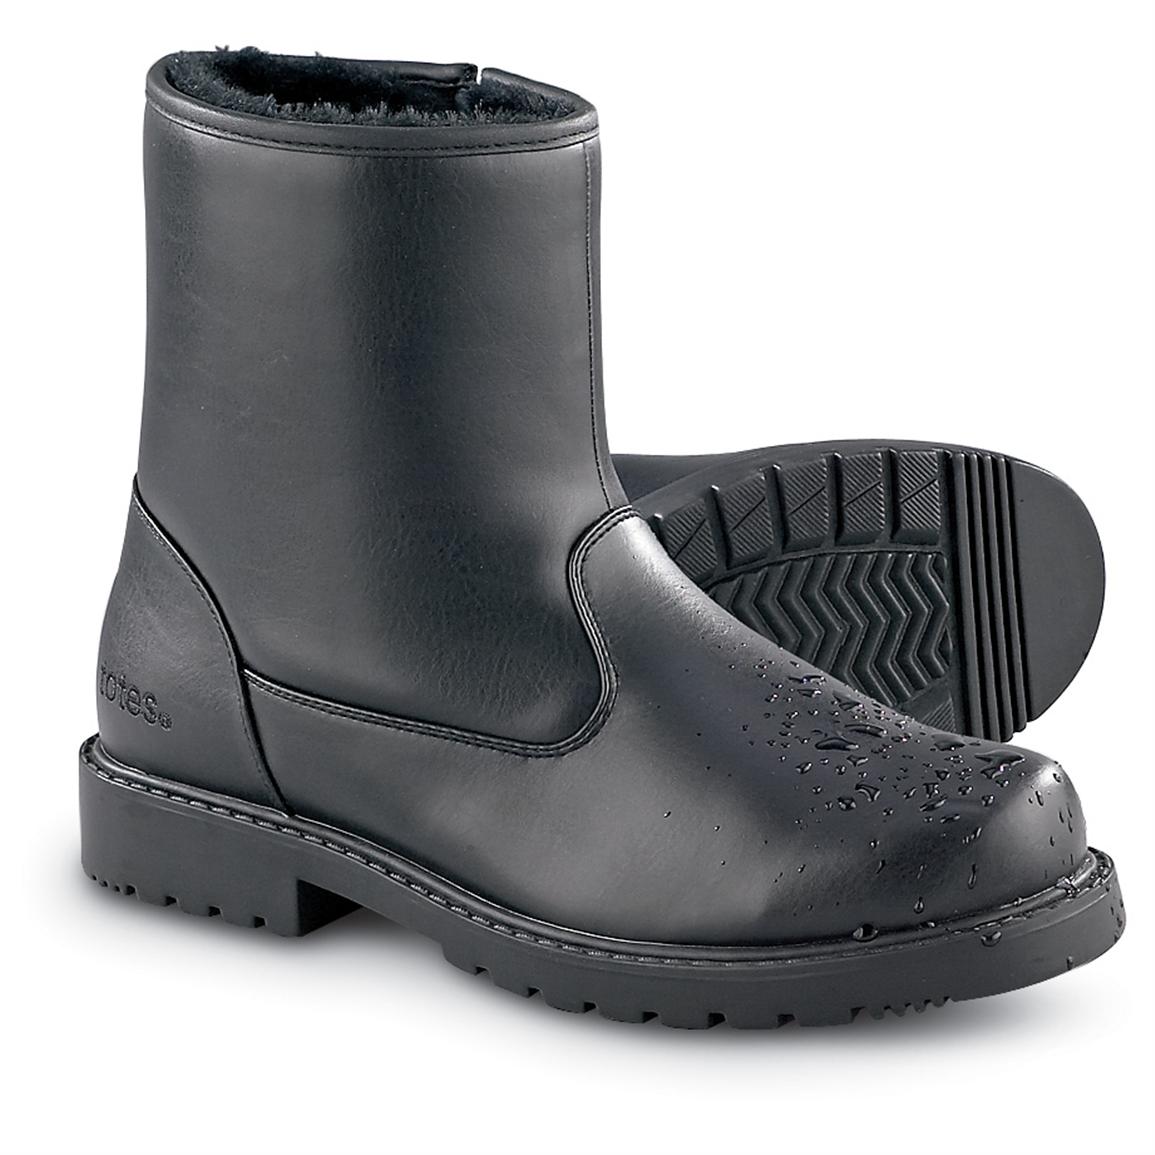 totes thermolite winter boots